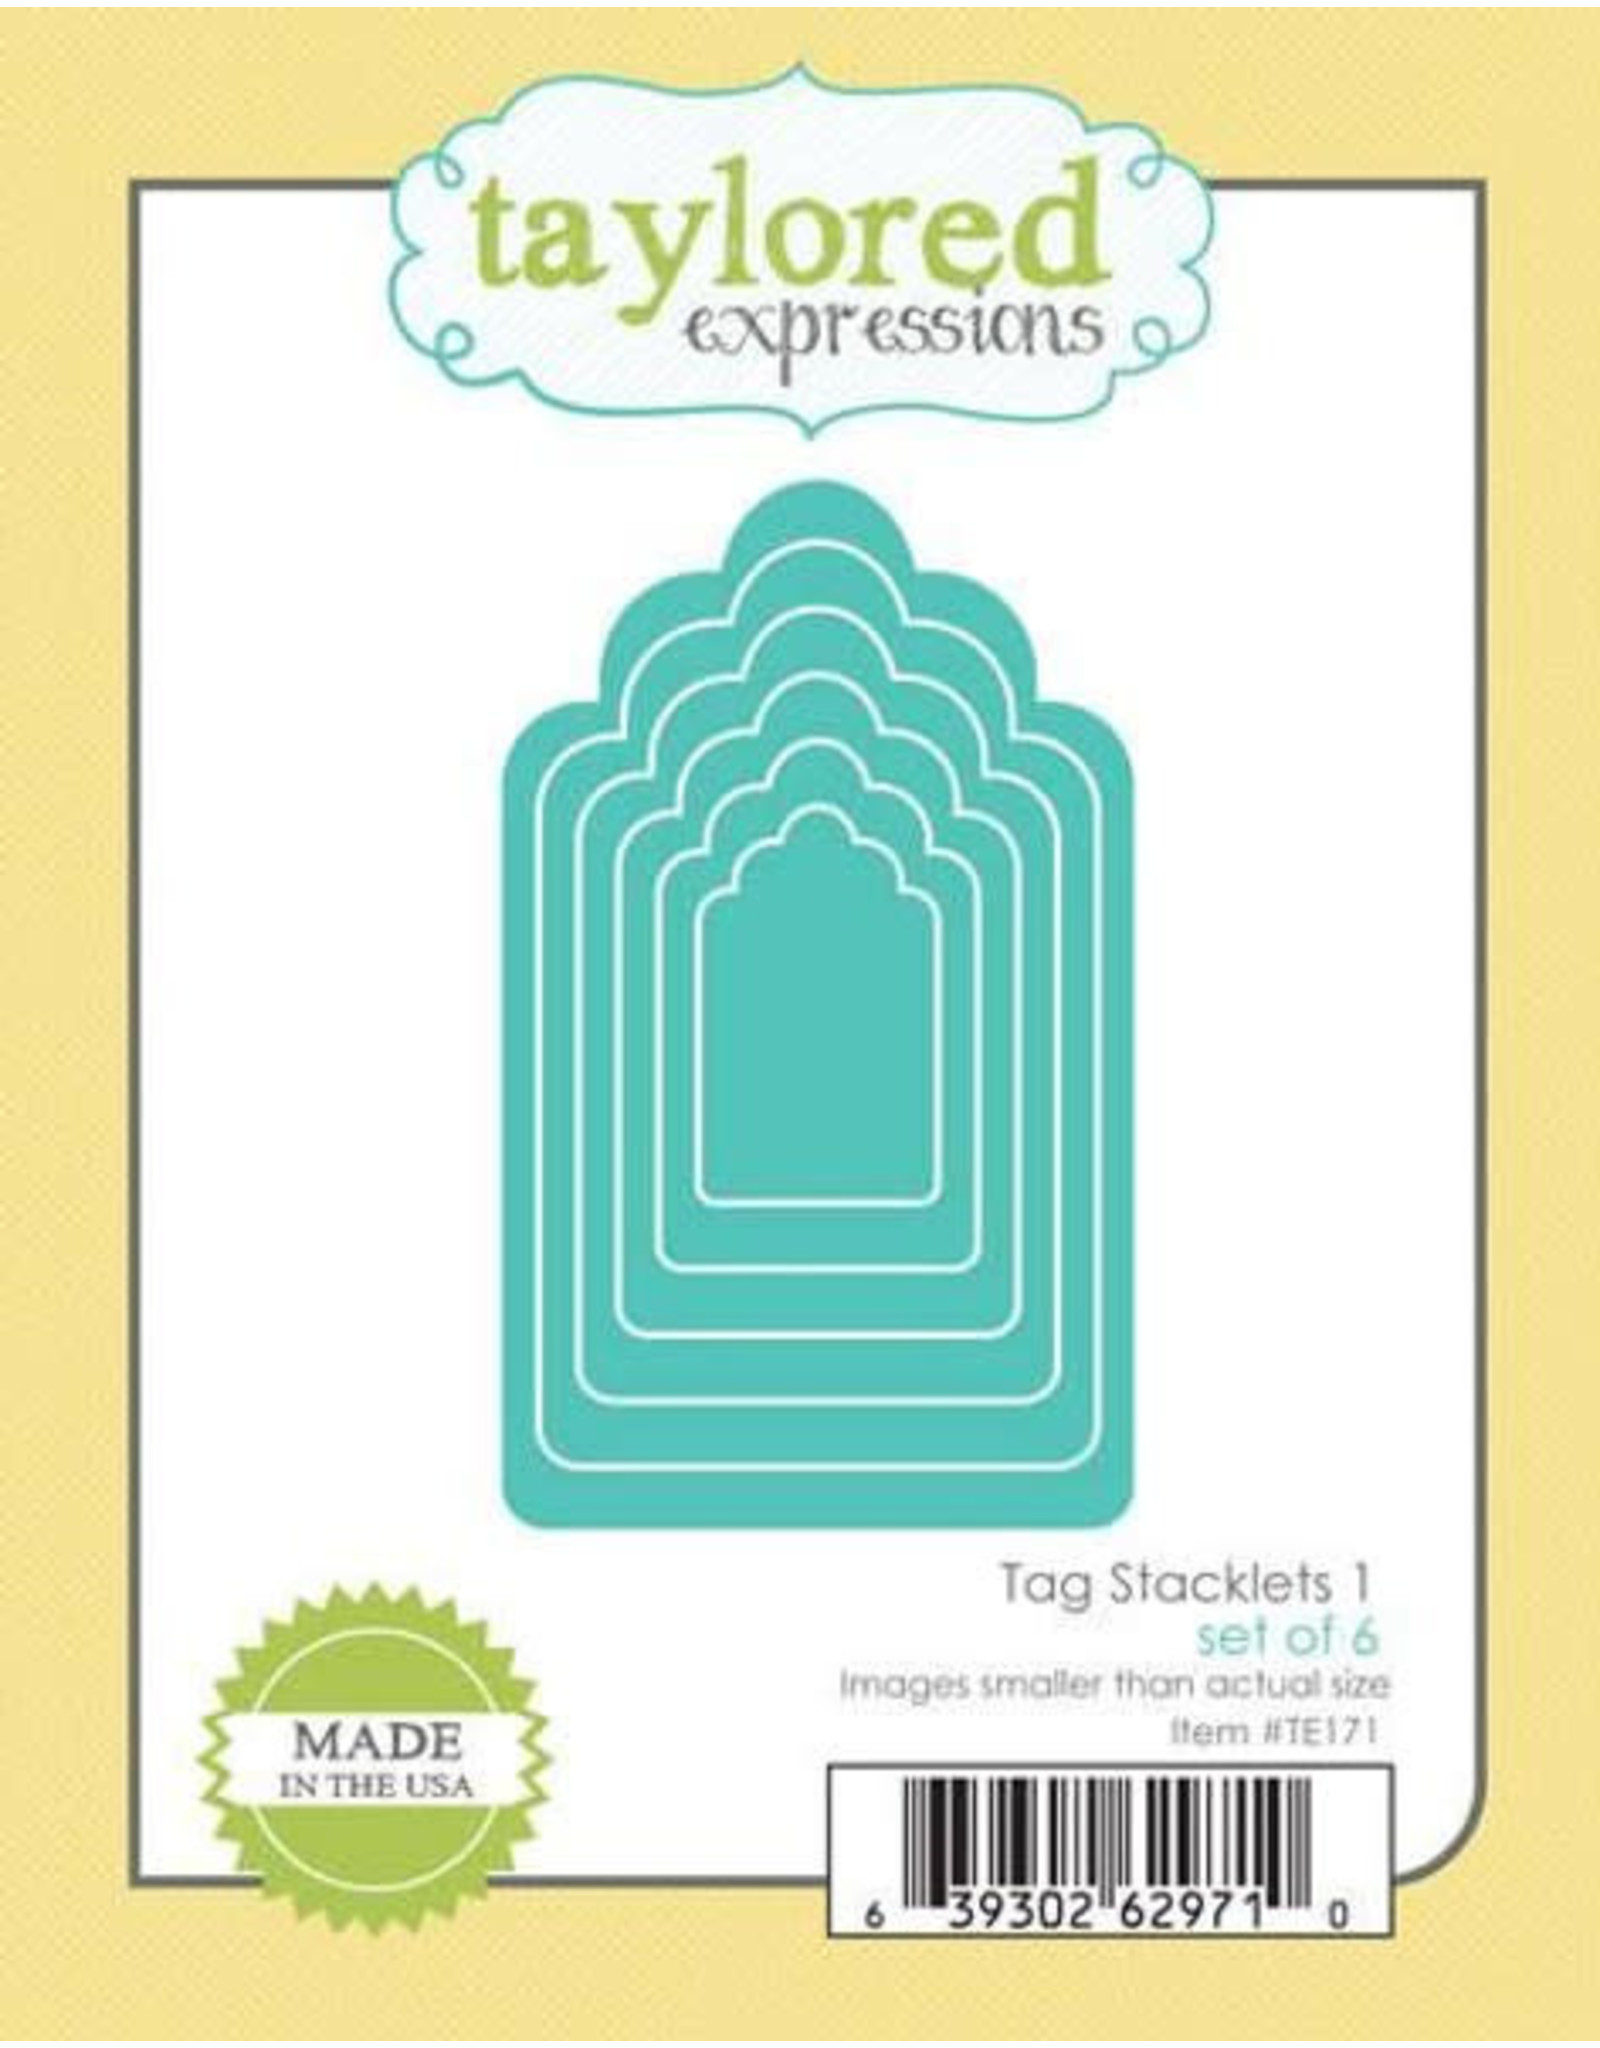 Taylored Expressions Tag Stacklets 1